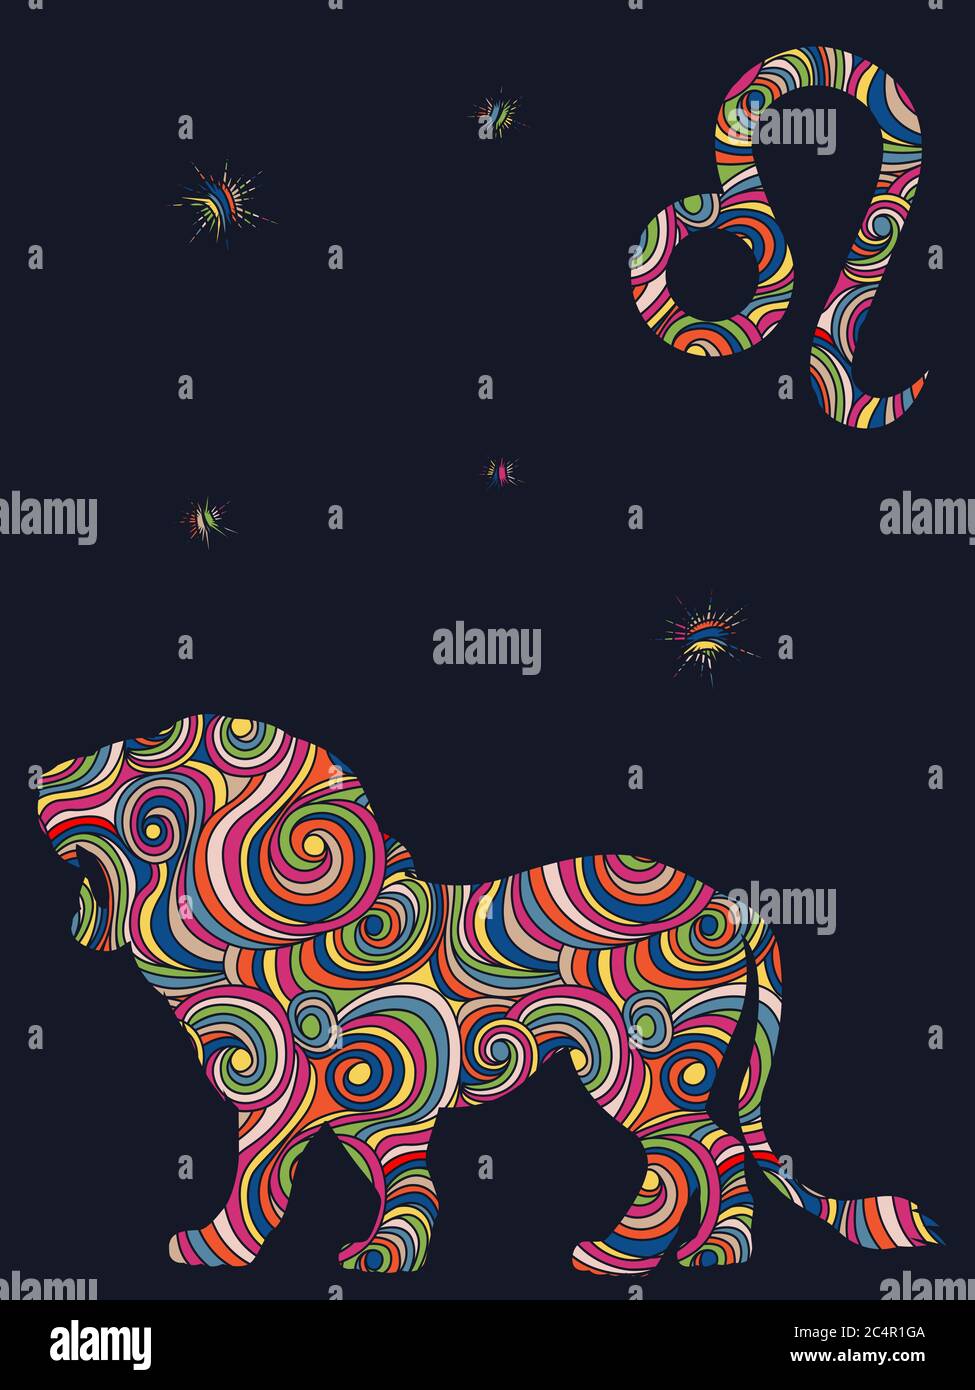 Zodiac sign Leo fill with colorful muted wavy shapes on the dark gray background with stars and astrological symbols, vector illustration Stock Vector